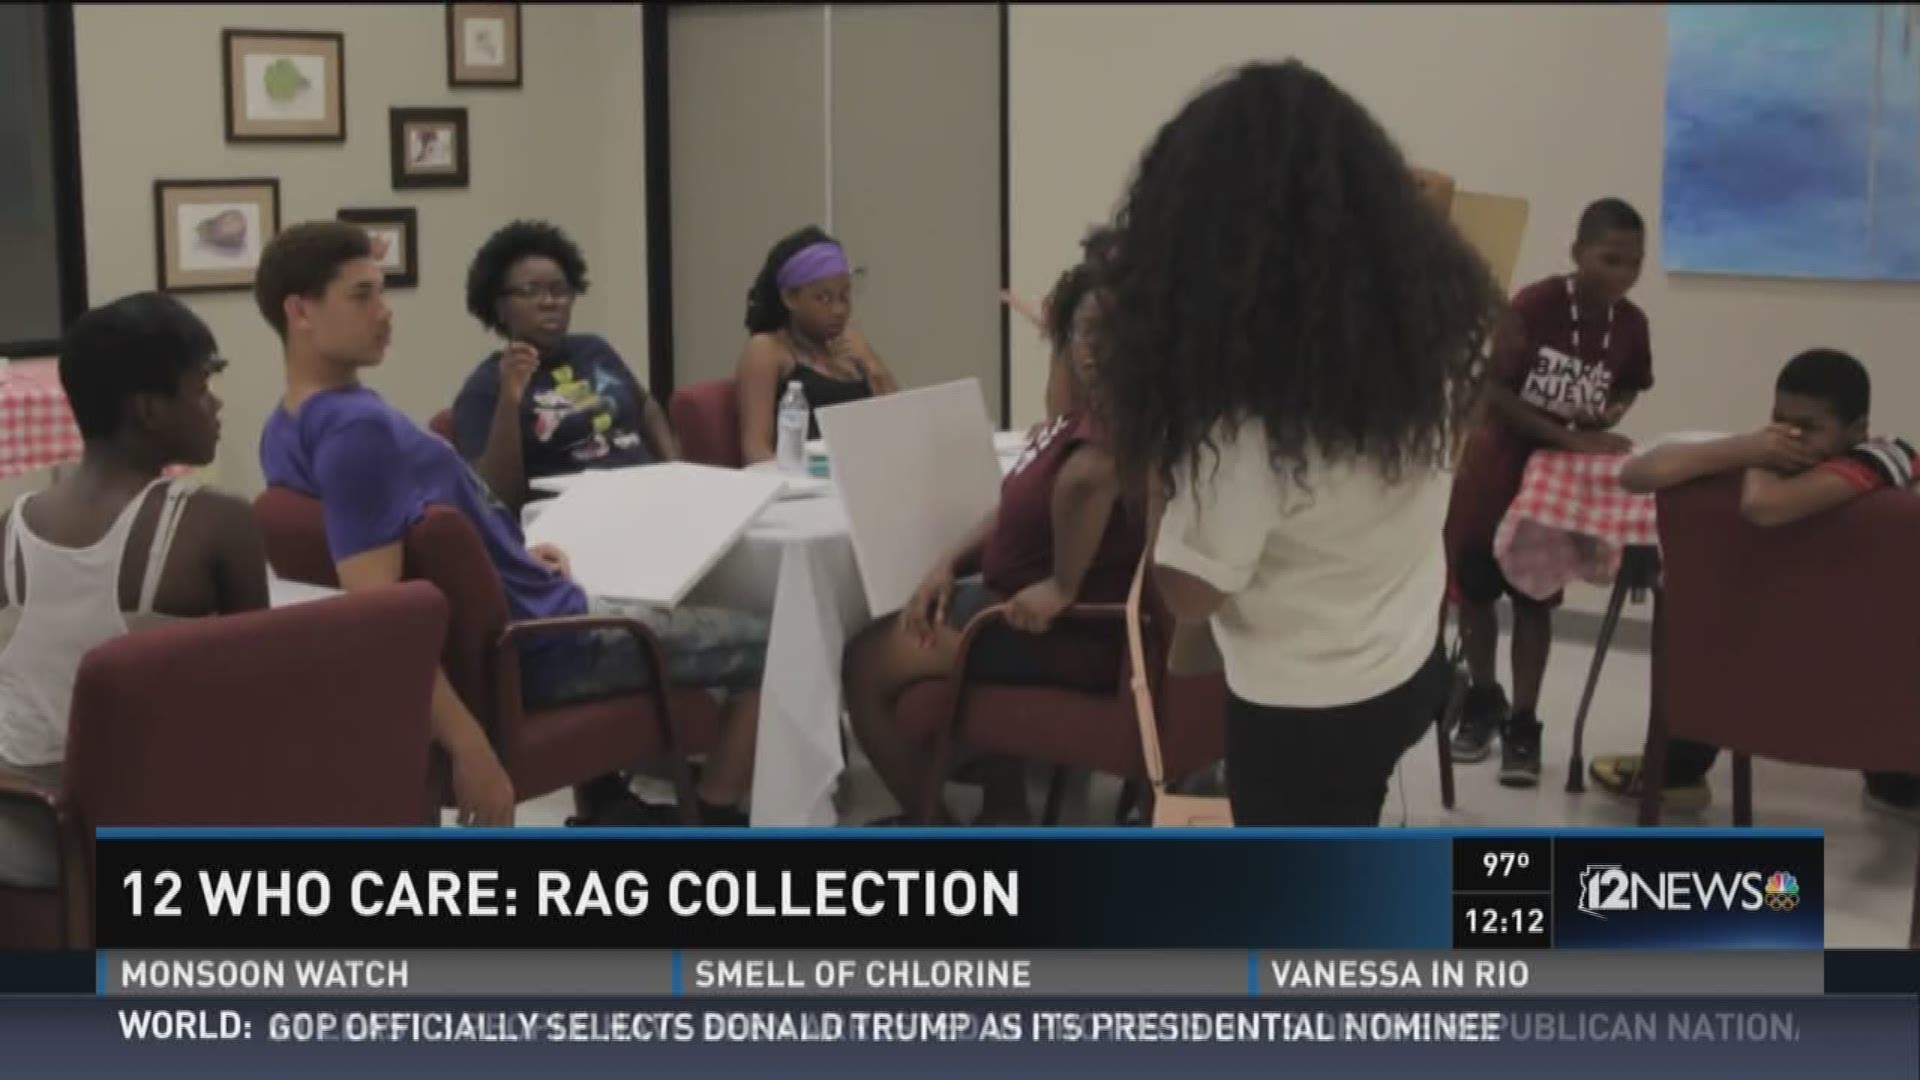 The rag collection wants you to express yourself and share your story through creativity.